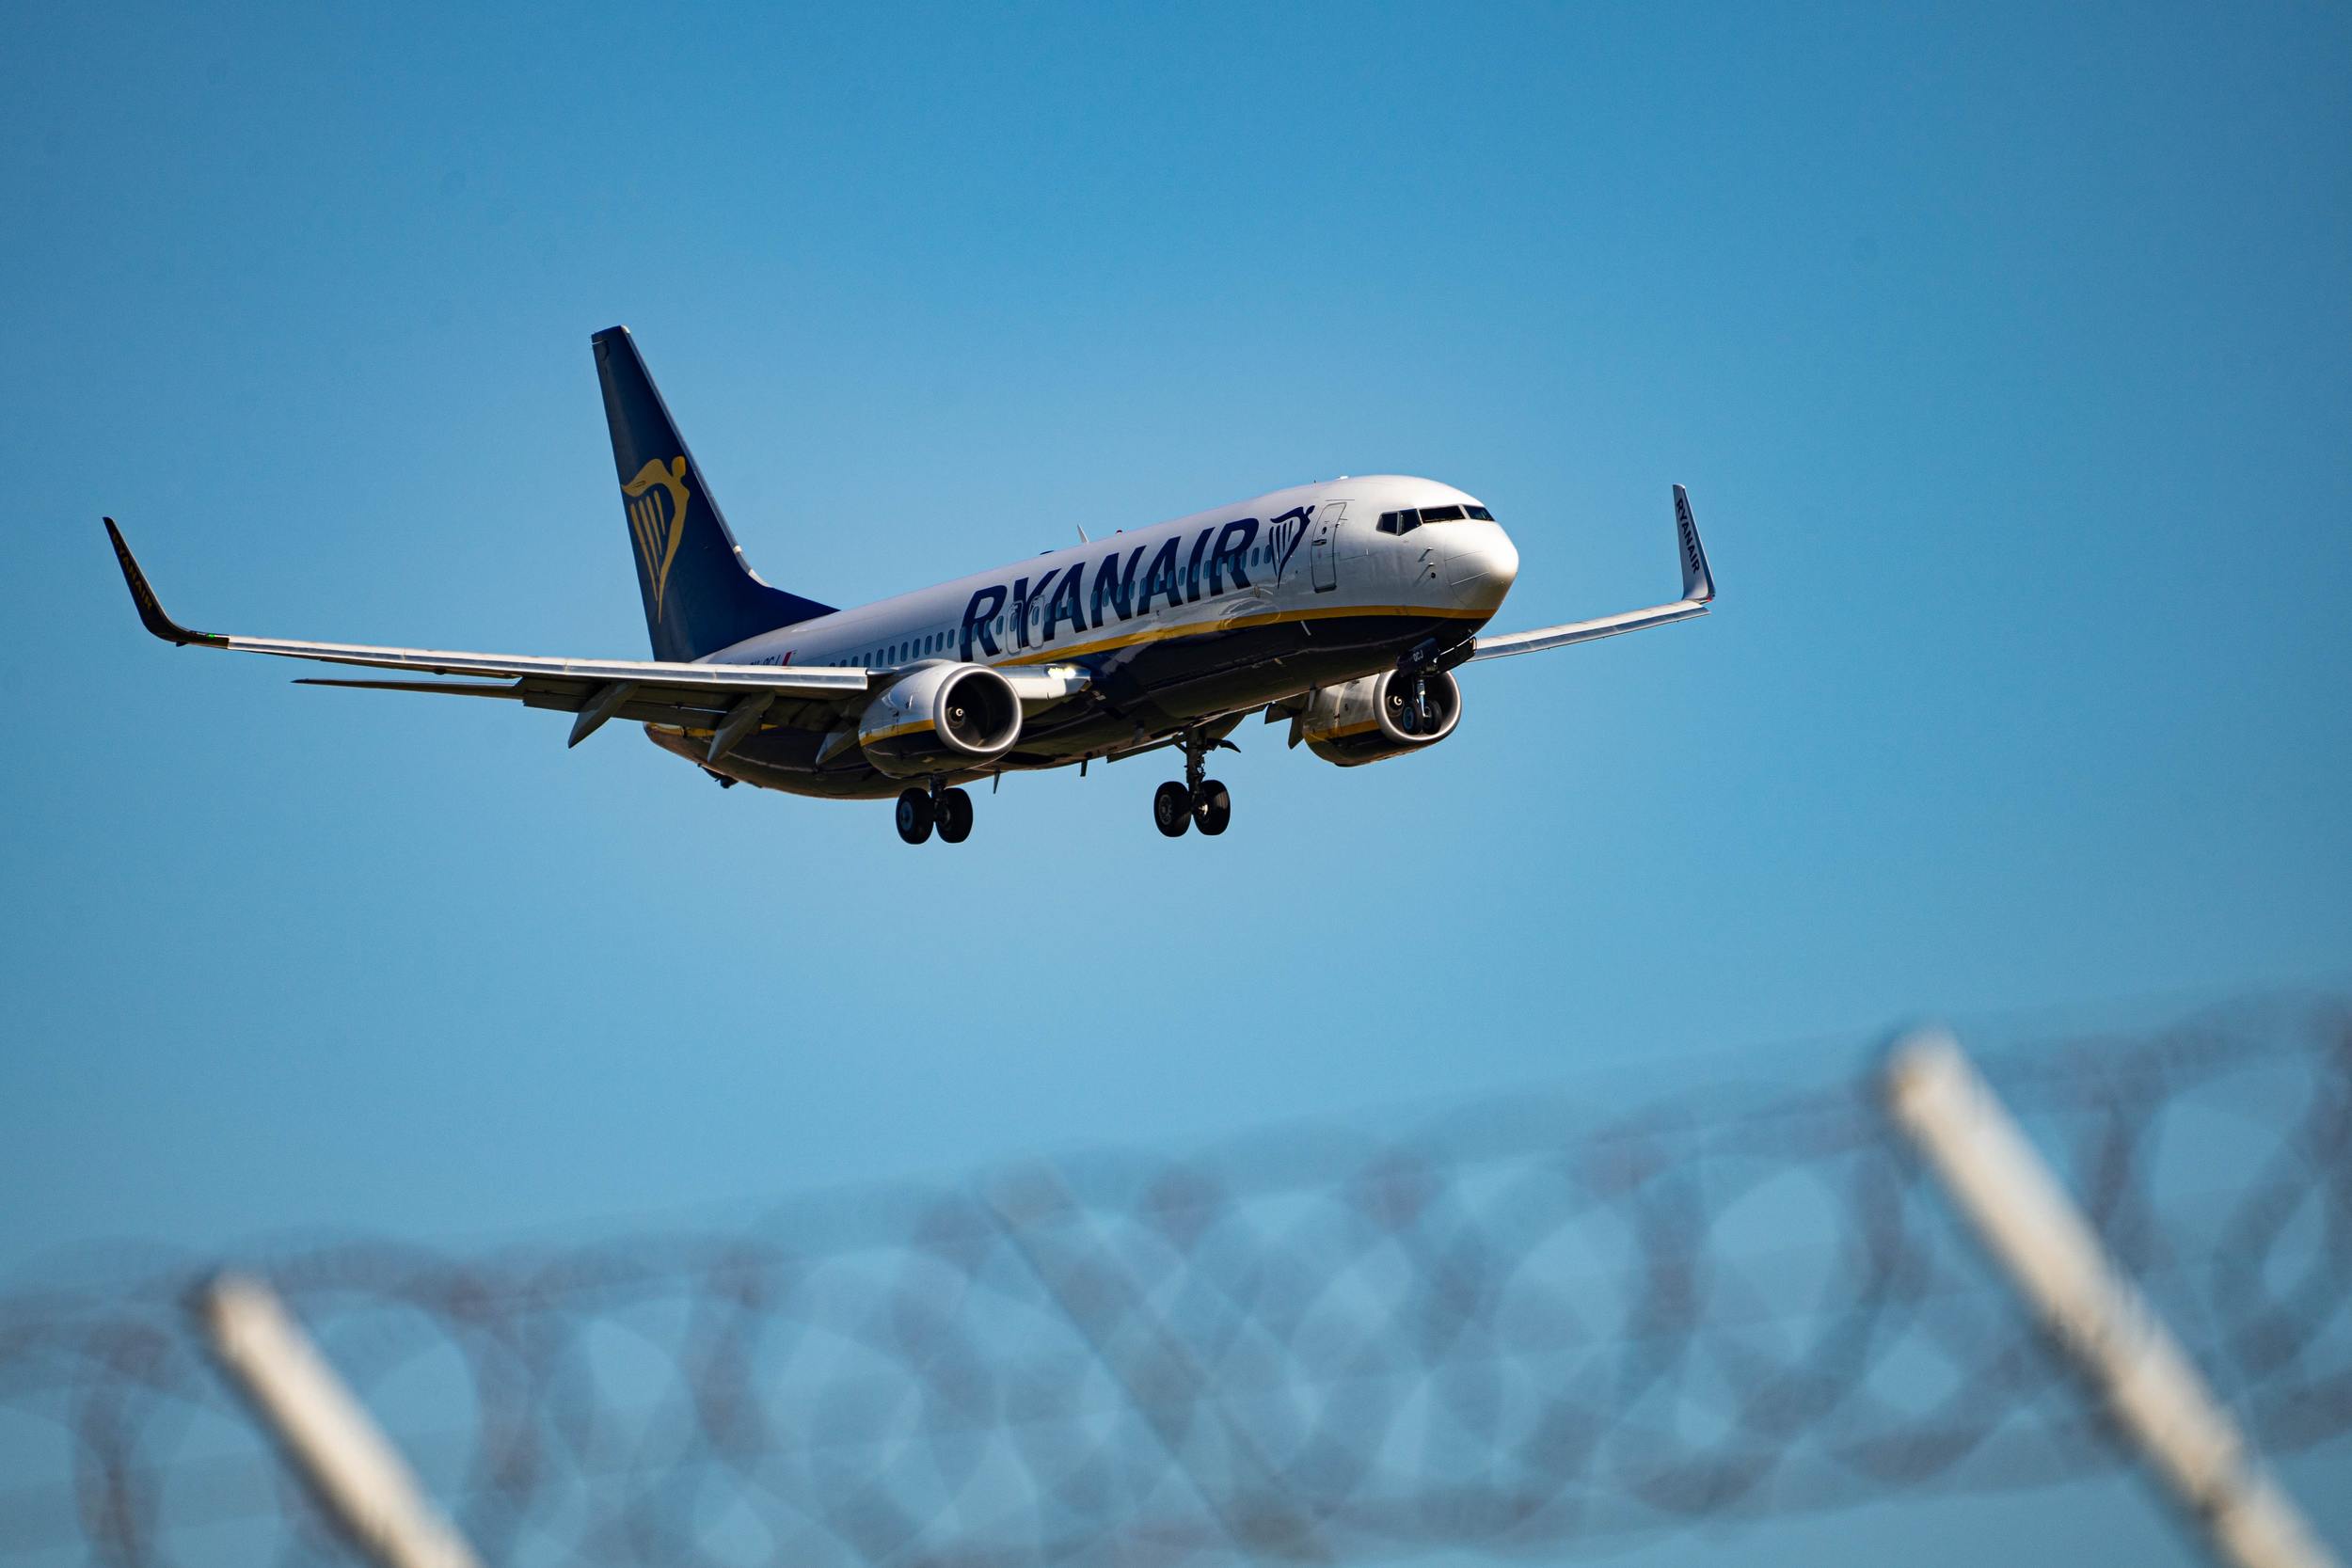 How to Change Flight with RyanAir